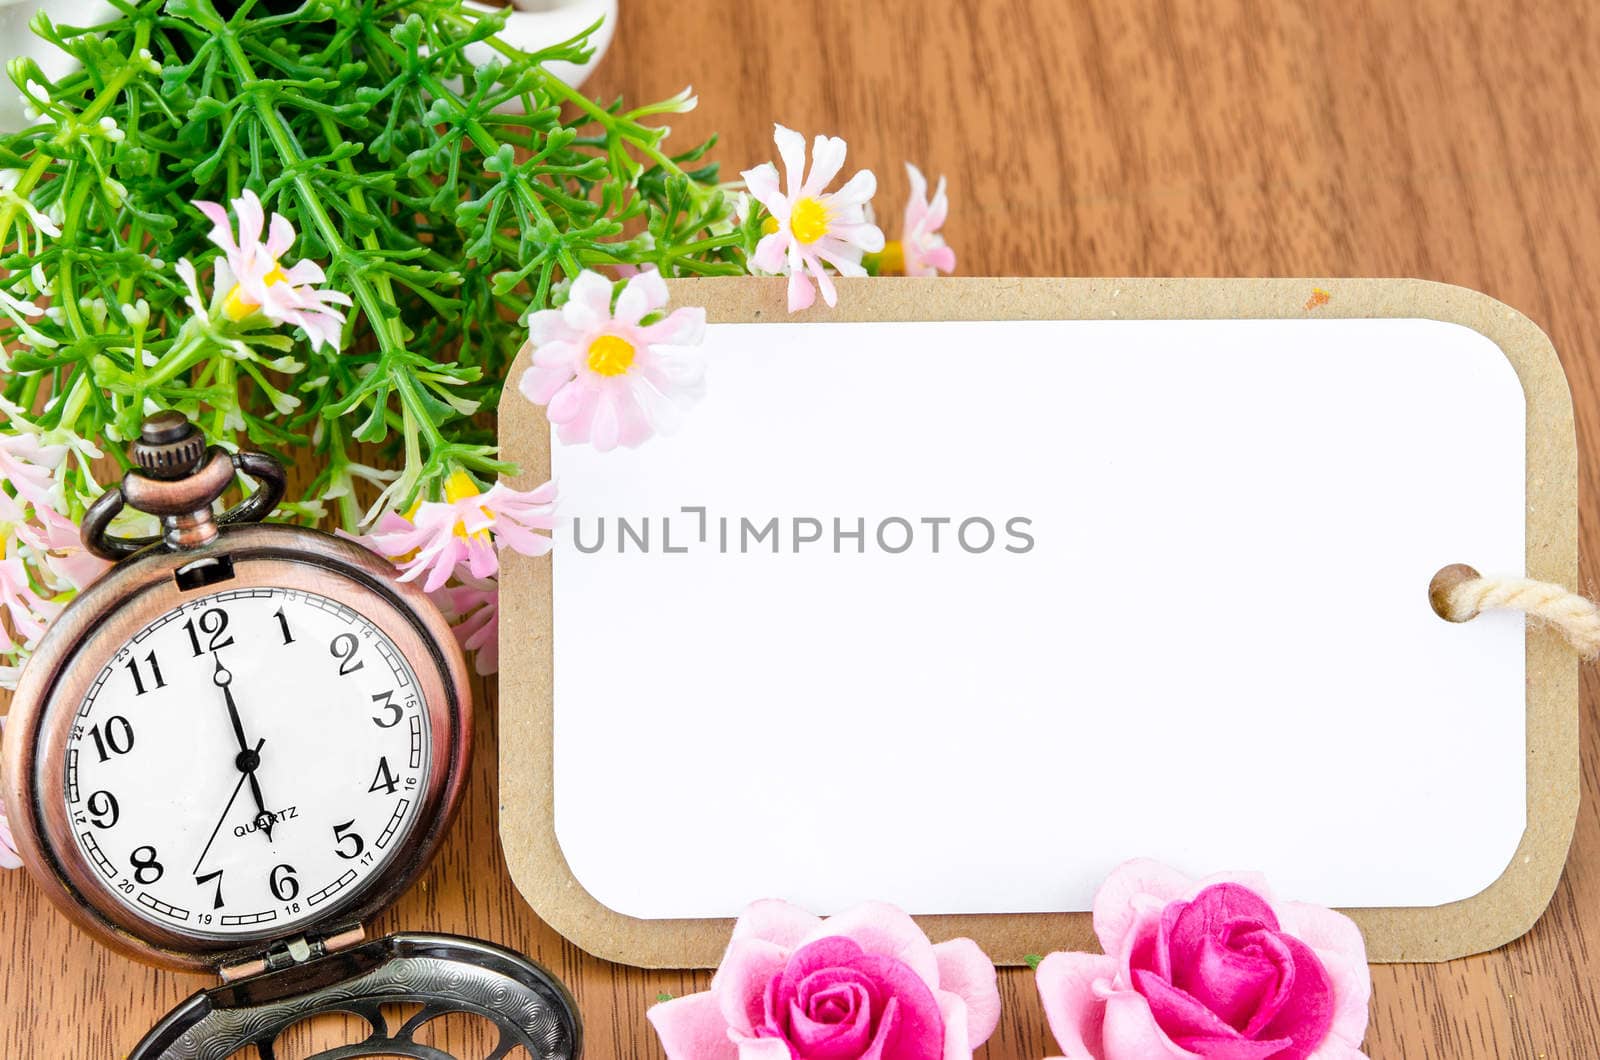 Blank greeting card and pocket watch with flower on wooden background.